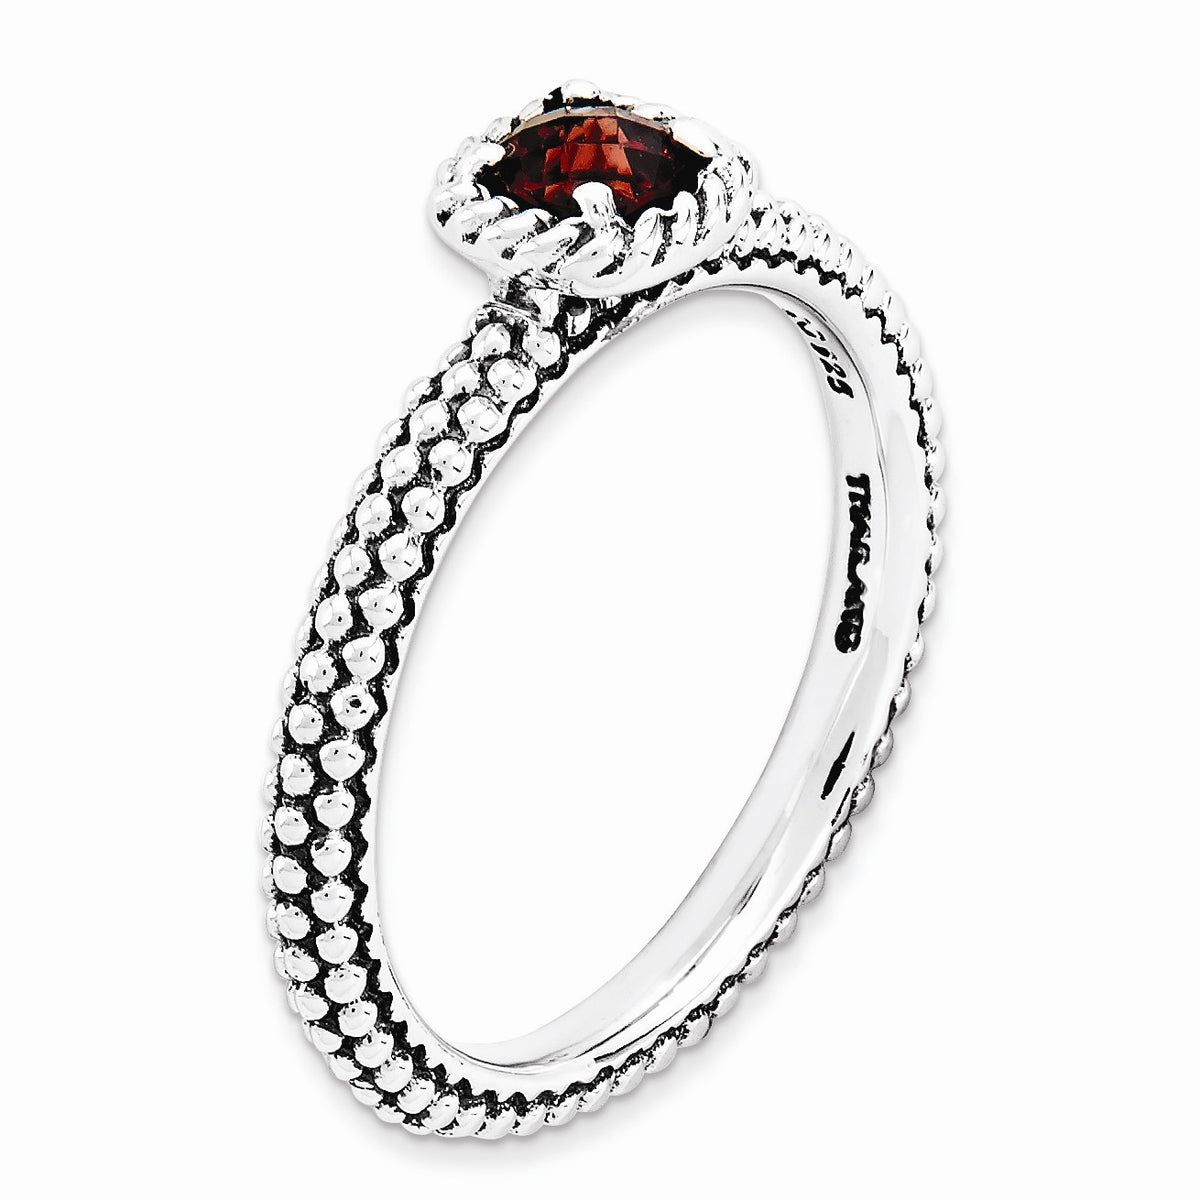 Alternate view of the Sterling Silver &amp; Garnet Solitaire Milgrain Band Stackable Ring by The Black Bow Jewelry Co.